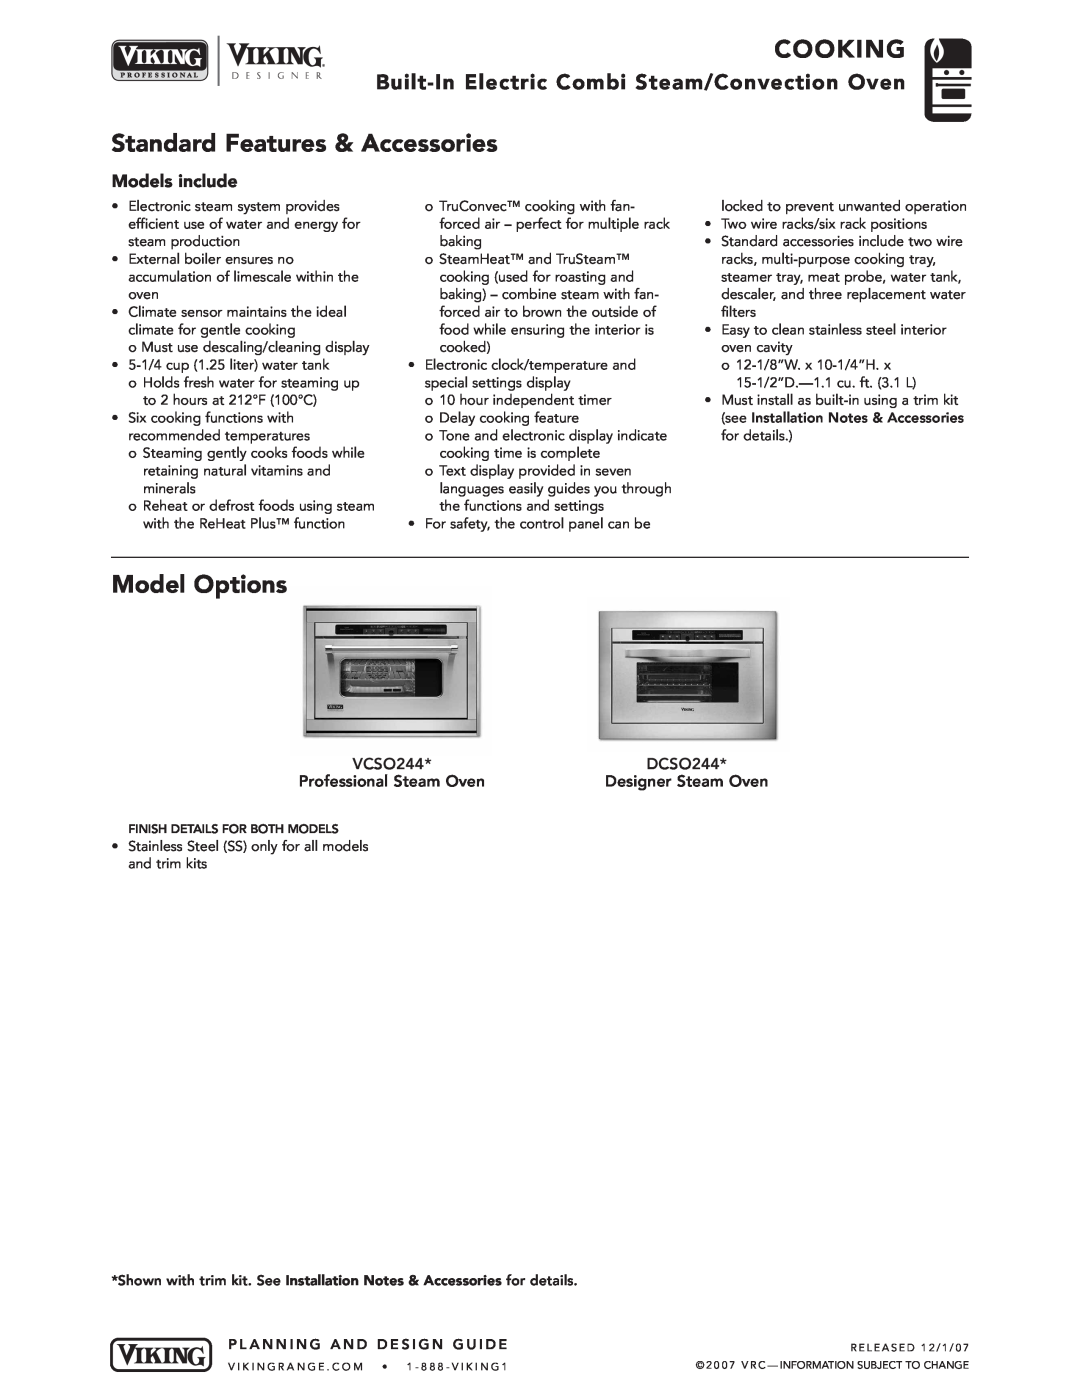 Viking VCSO244*, DCSO244* manual Cooking, Standard Features & Accessories, Model Options, Models include 